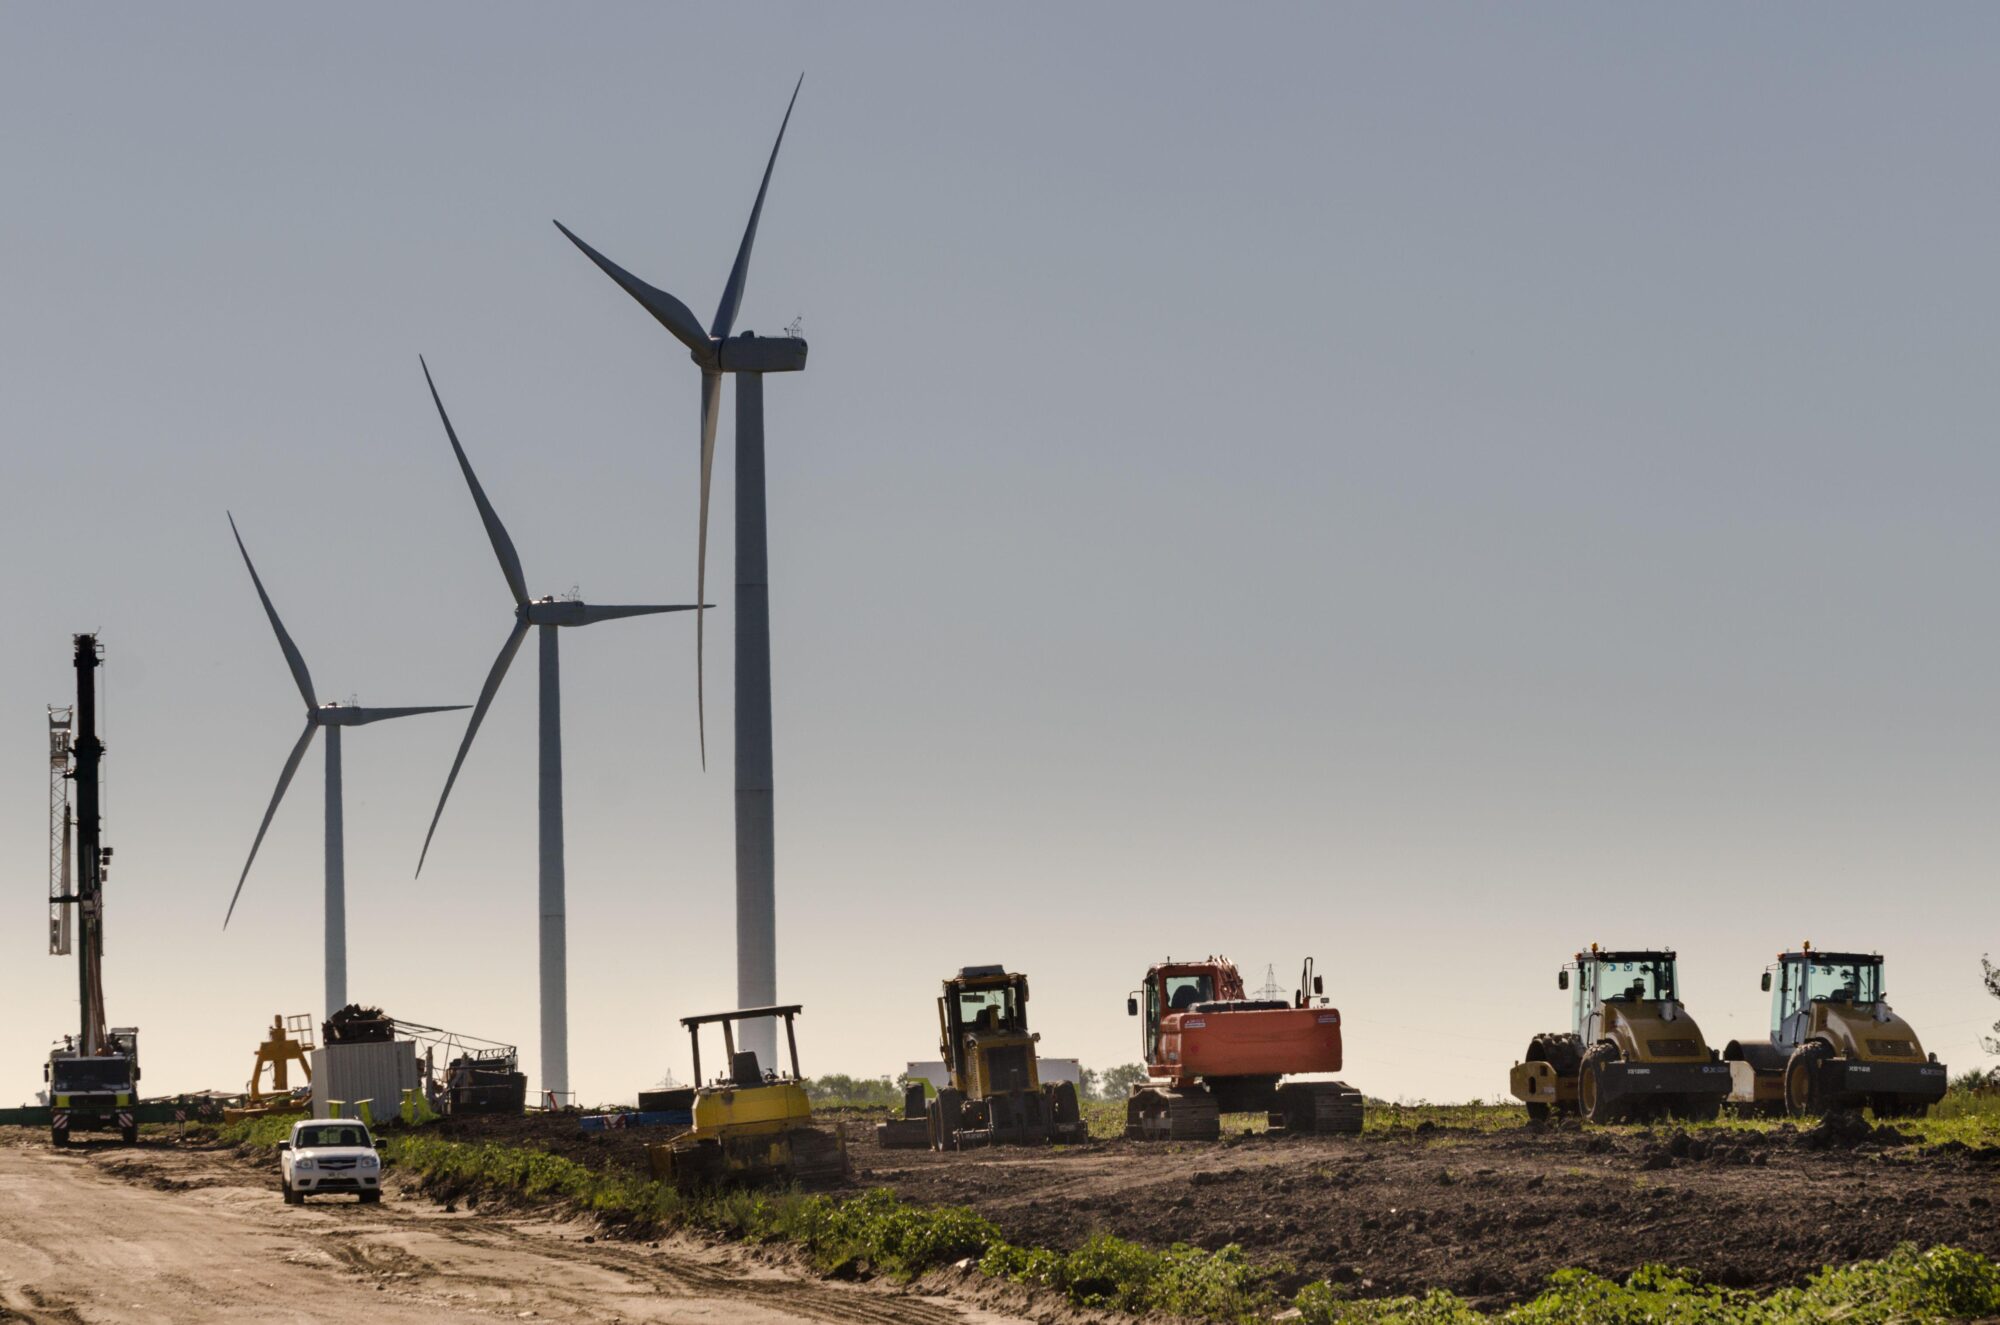 Windmills and agricultural machinery in a field in Uruguay